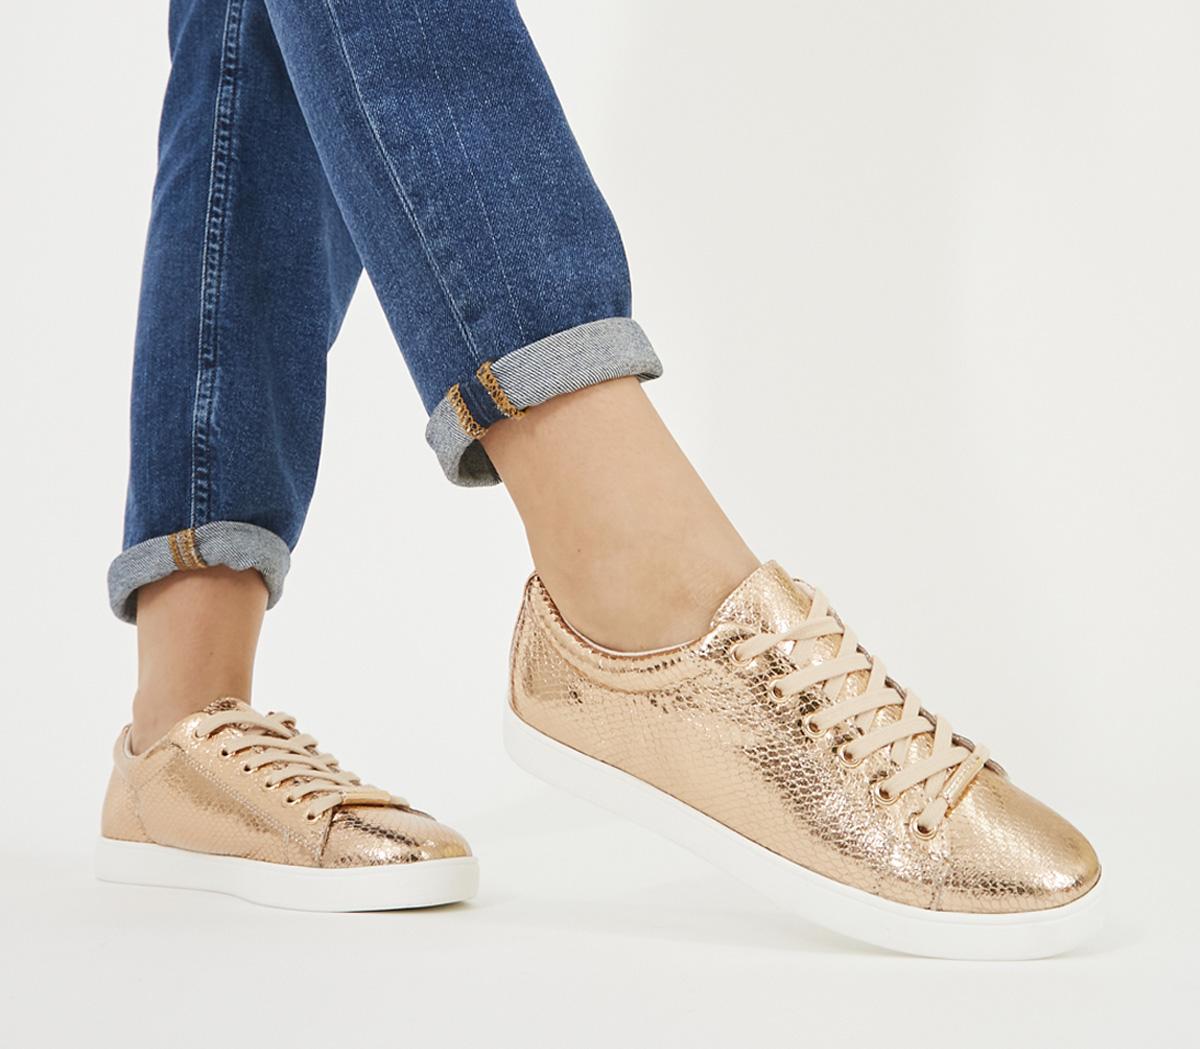 OFFICEFlorence Lace Up TrainersRose Gold Snake